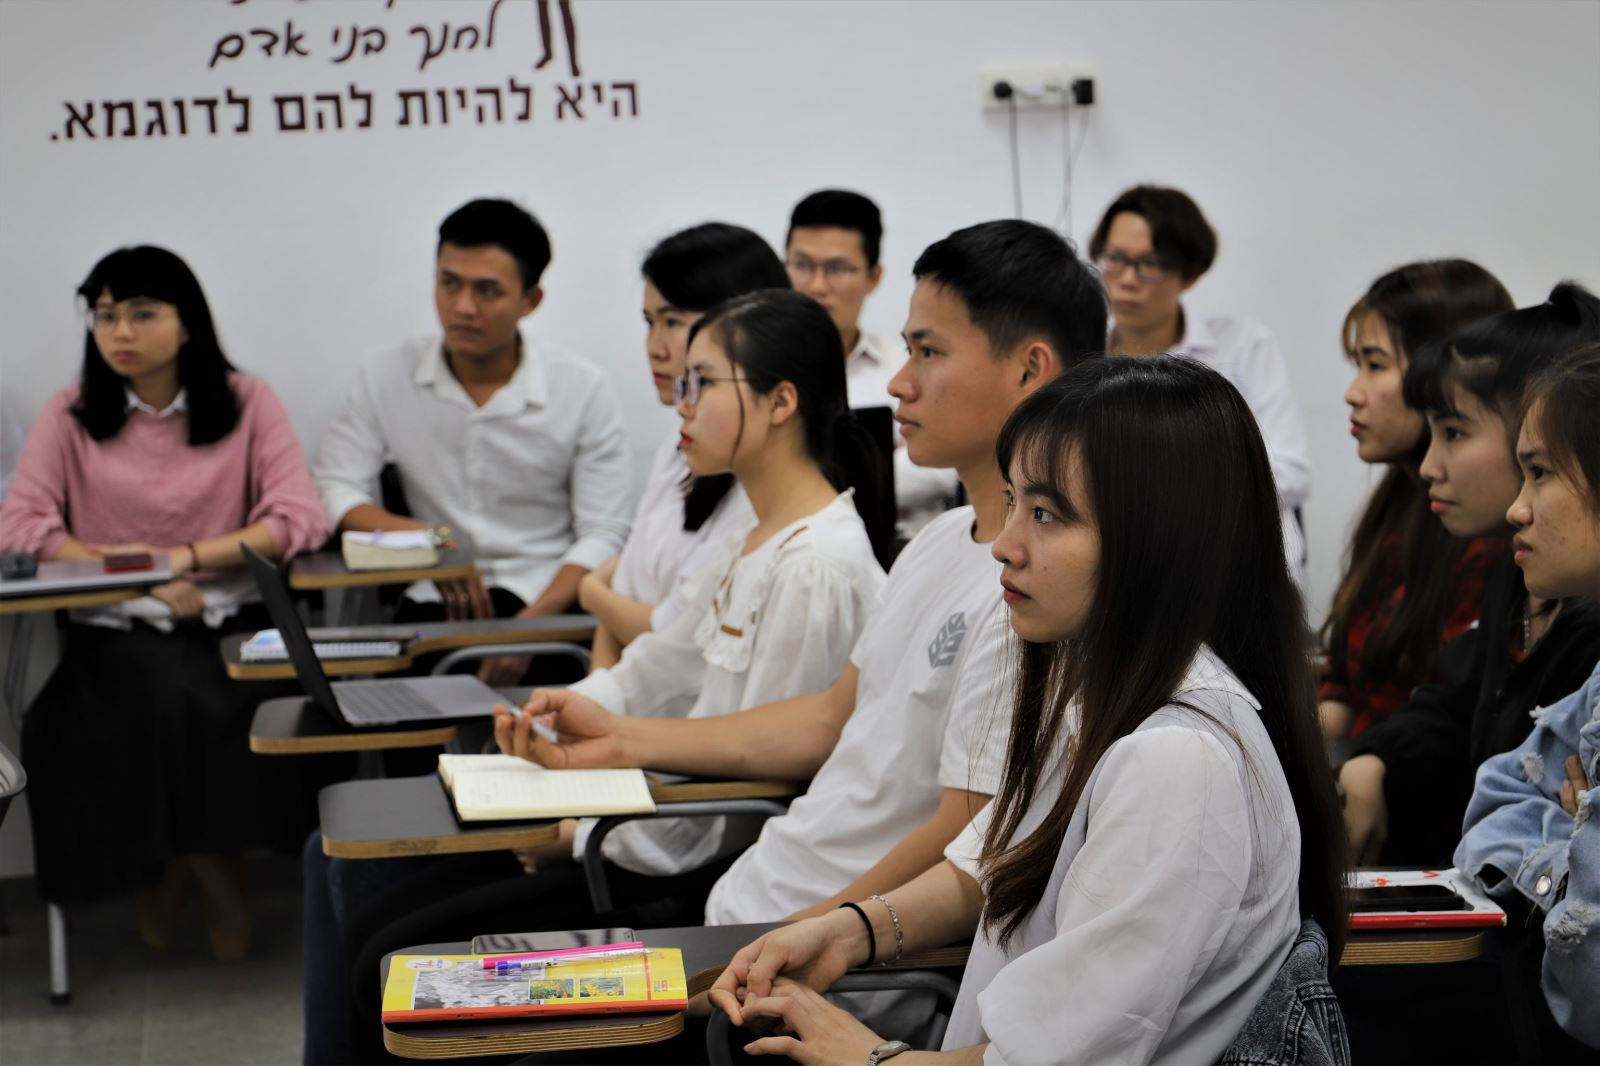 Vietnamese Embassy in Israel visits, encourages trainees post-conflict